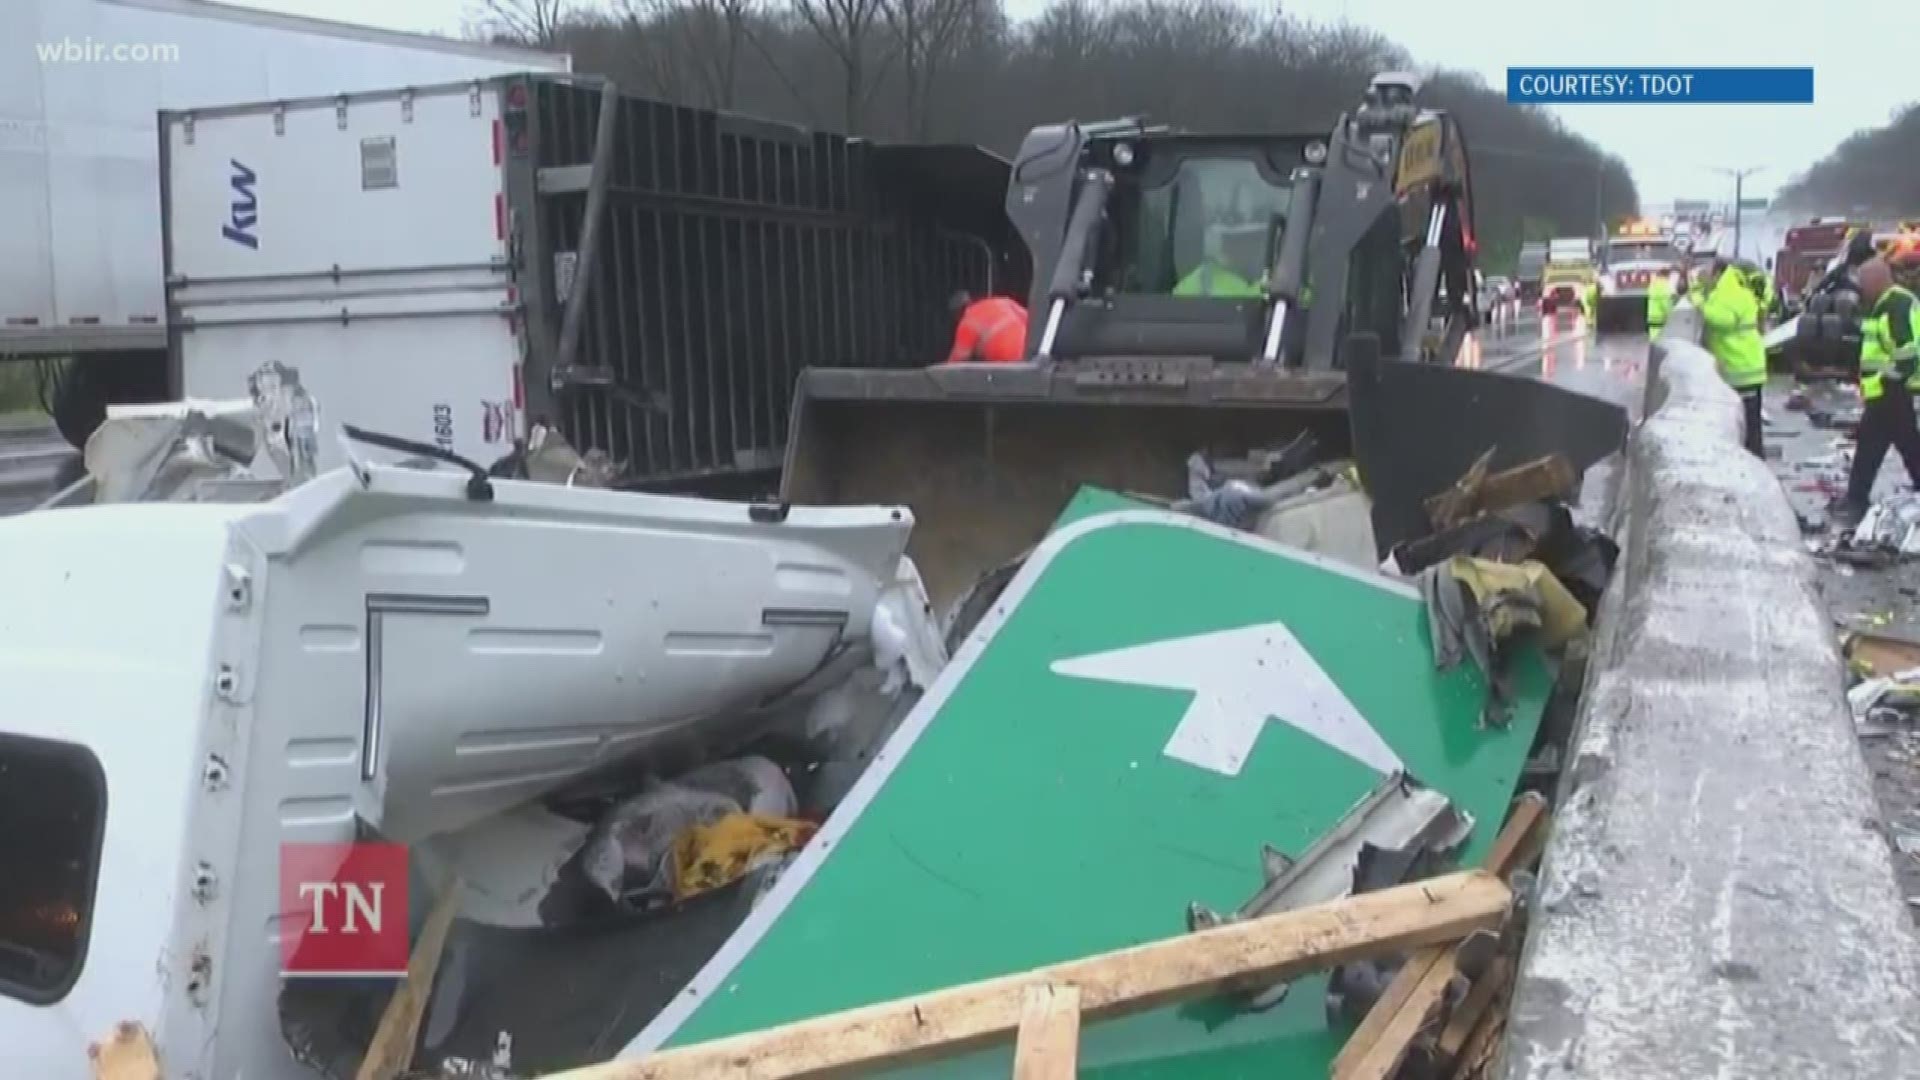 Police say that tractor-trailer lost control, hit the median and flipped. It also hit the overhanging interstate sign and knocked it down onto another vehicle.